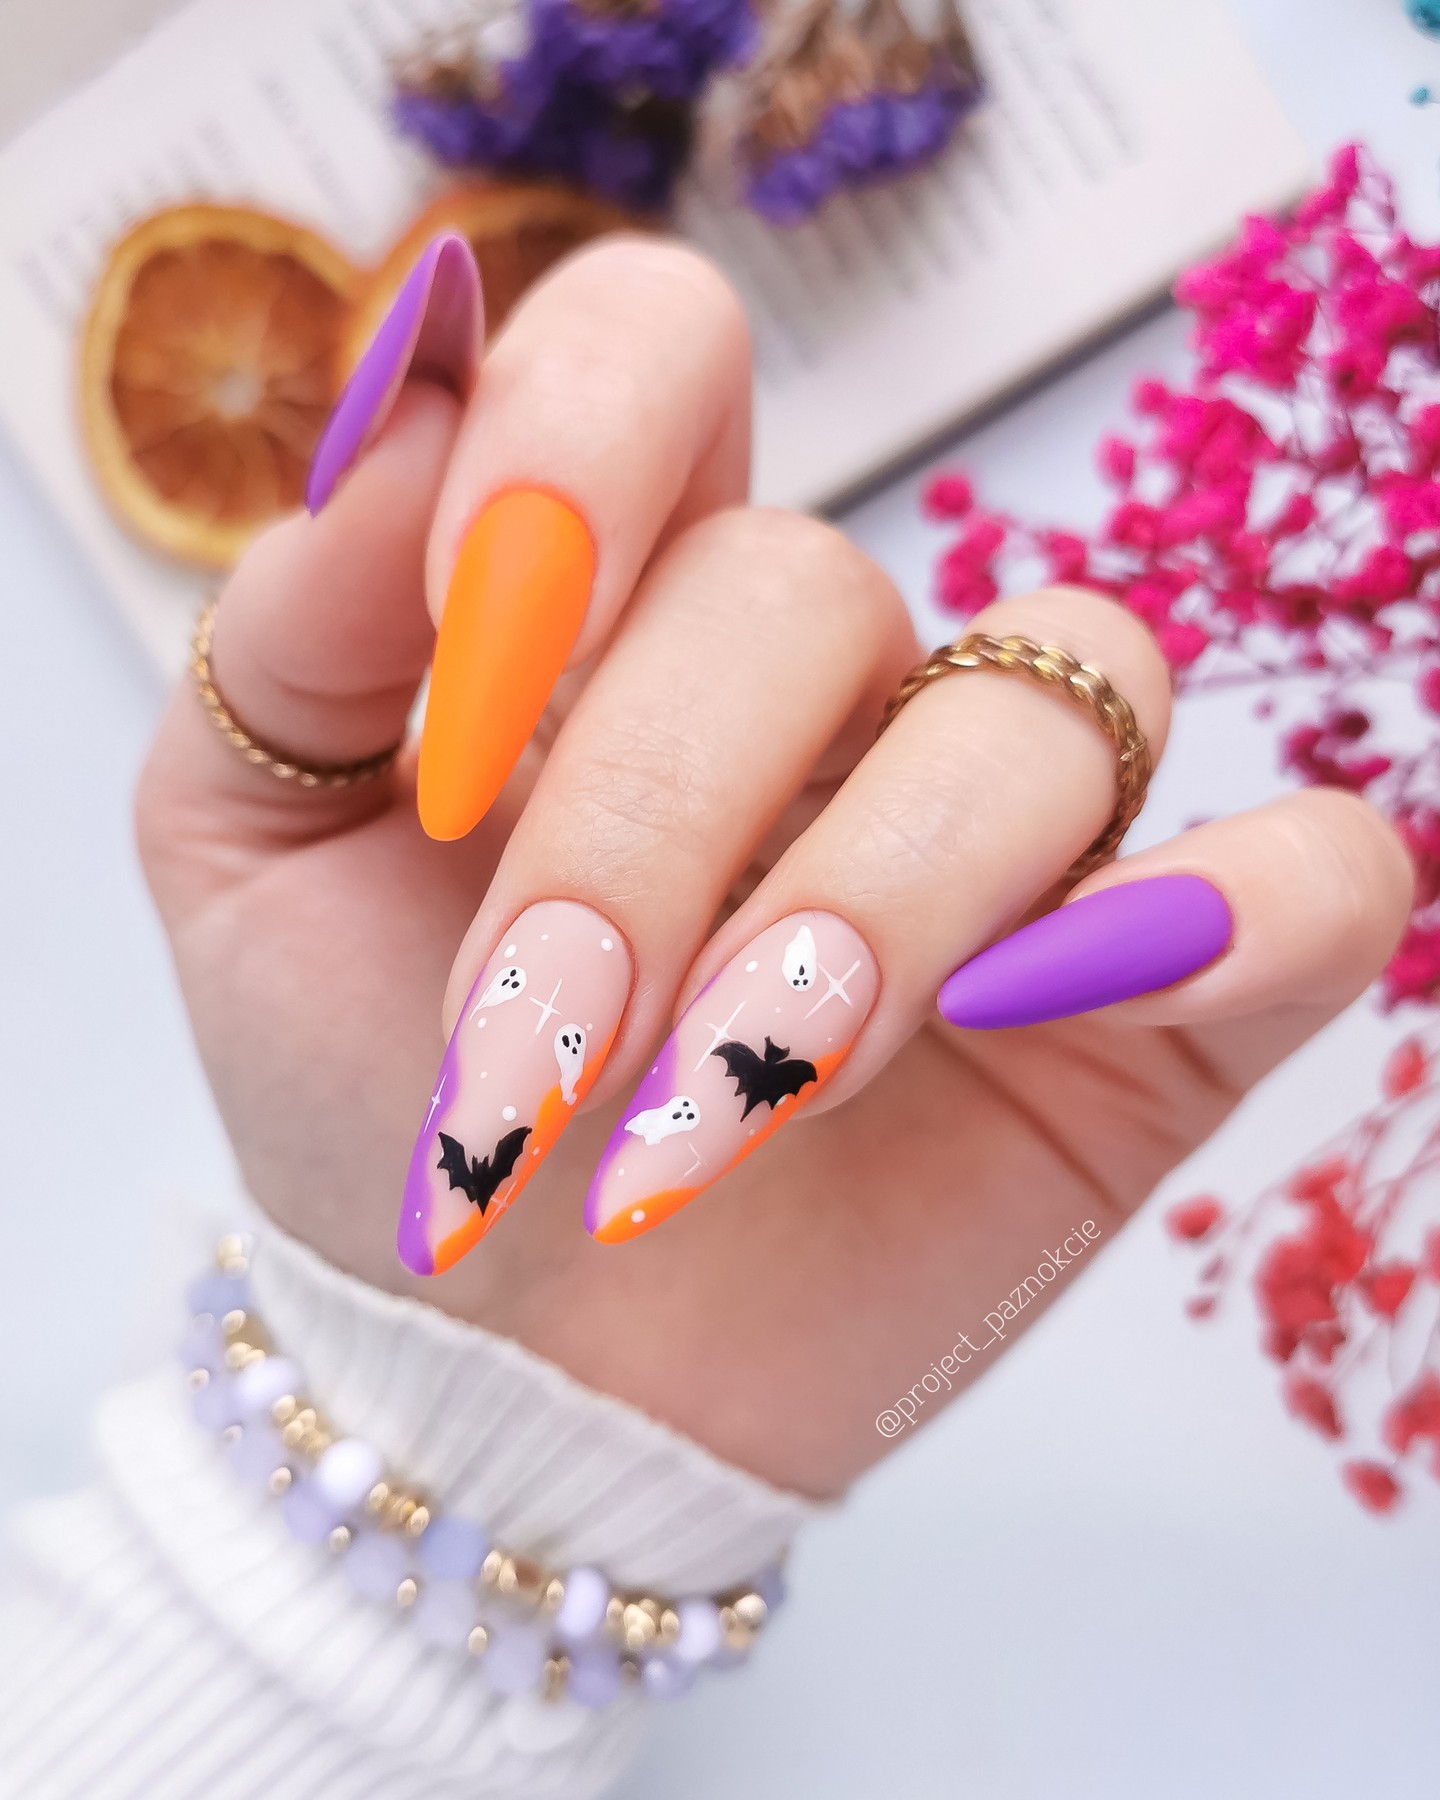 It is a lot of fun to use orange and purple in the same palette. The colors are similar enough that they can be combined, but different enough that they will still look new and fresh. To give this nail design a scary look, add some bats and ghosts on accent nails.